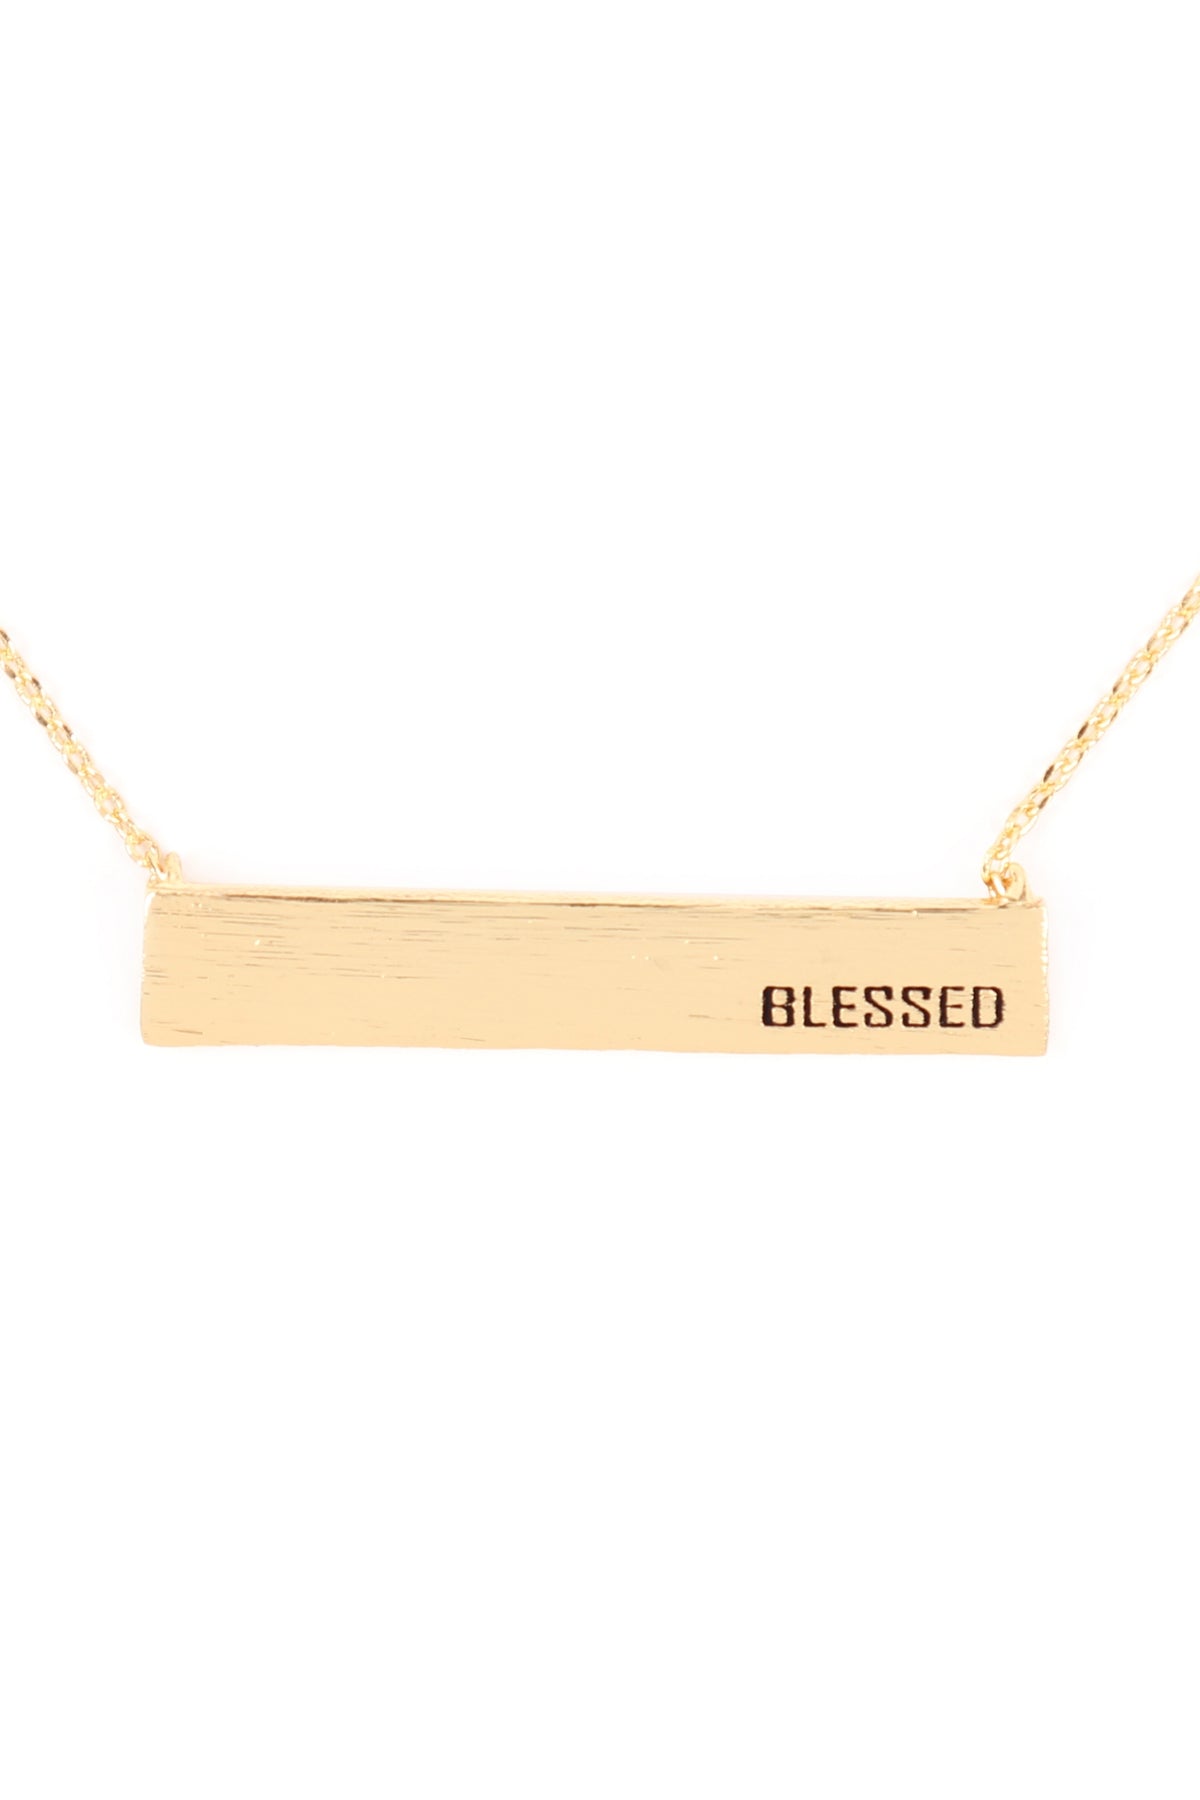 " BLESSED" CUSTOM BAR NECKLACE  (NOW $1.75 ONLY!)